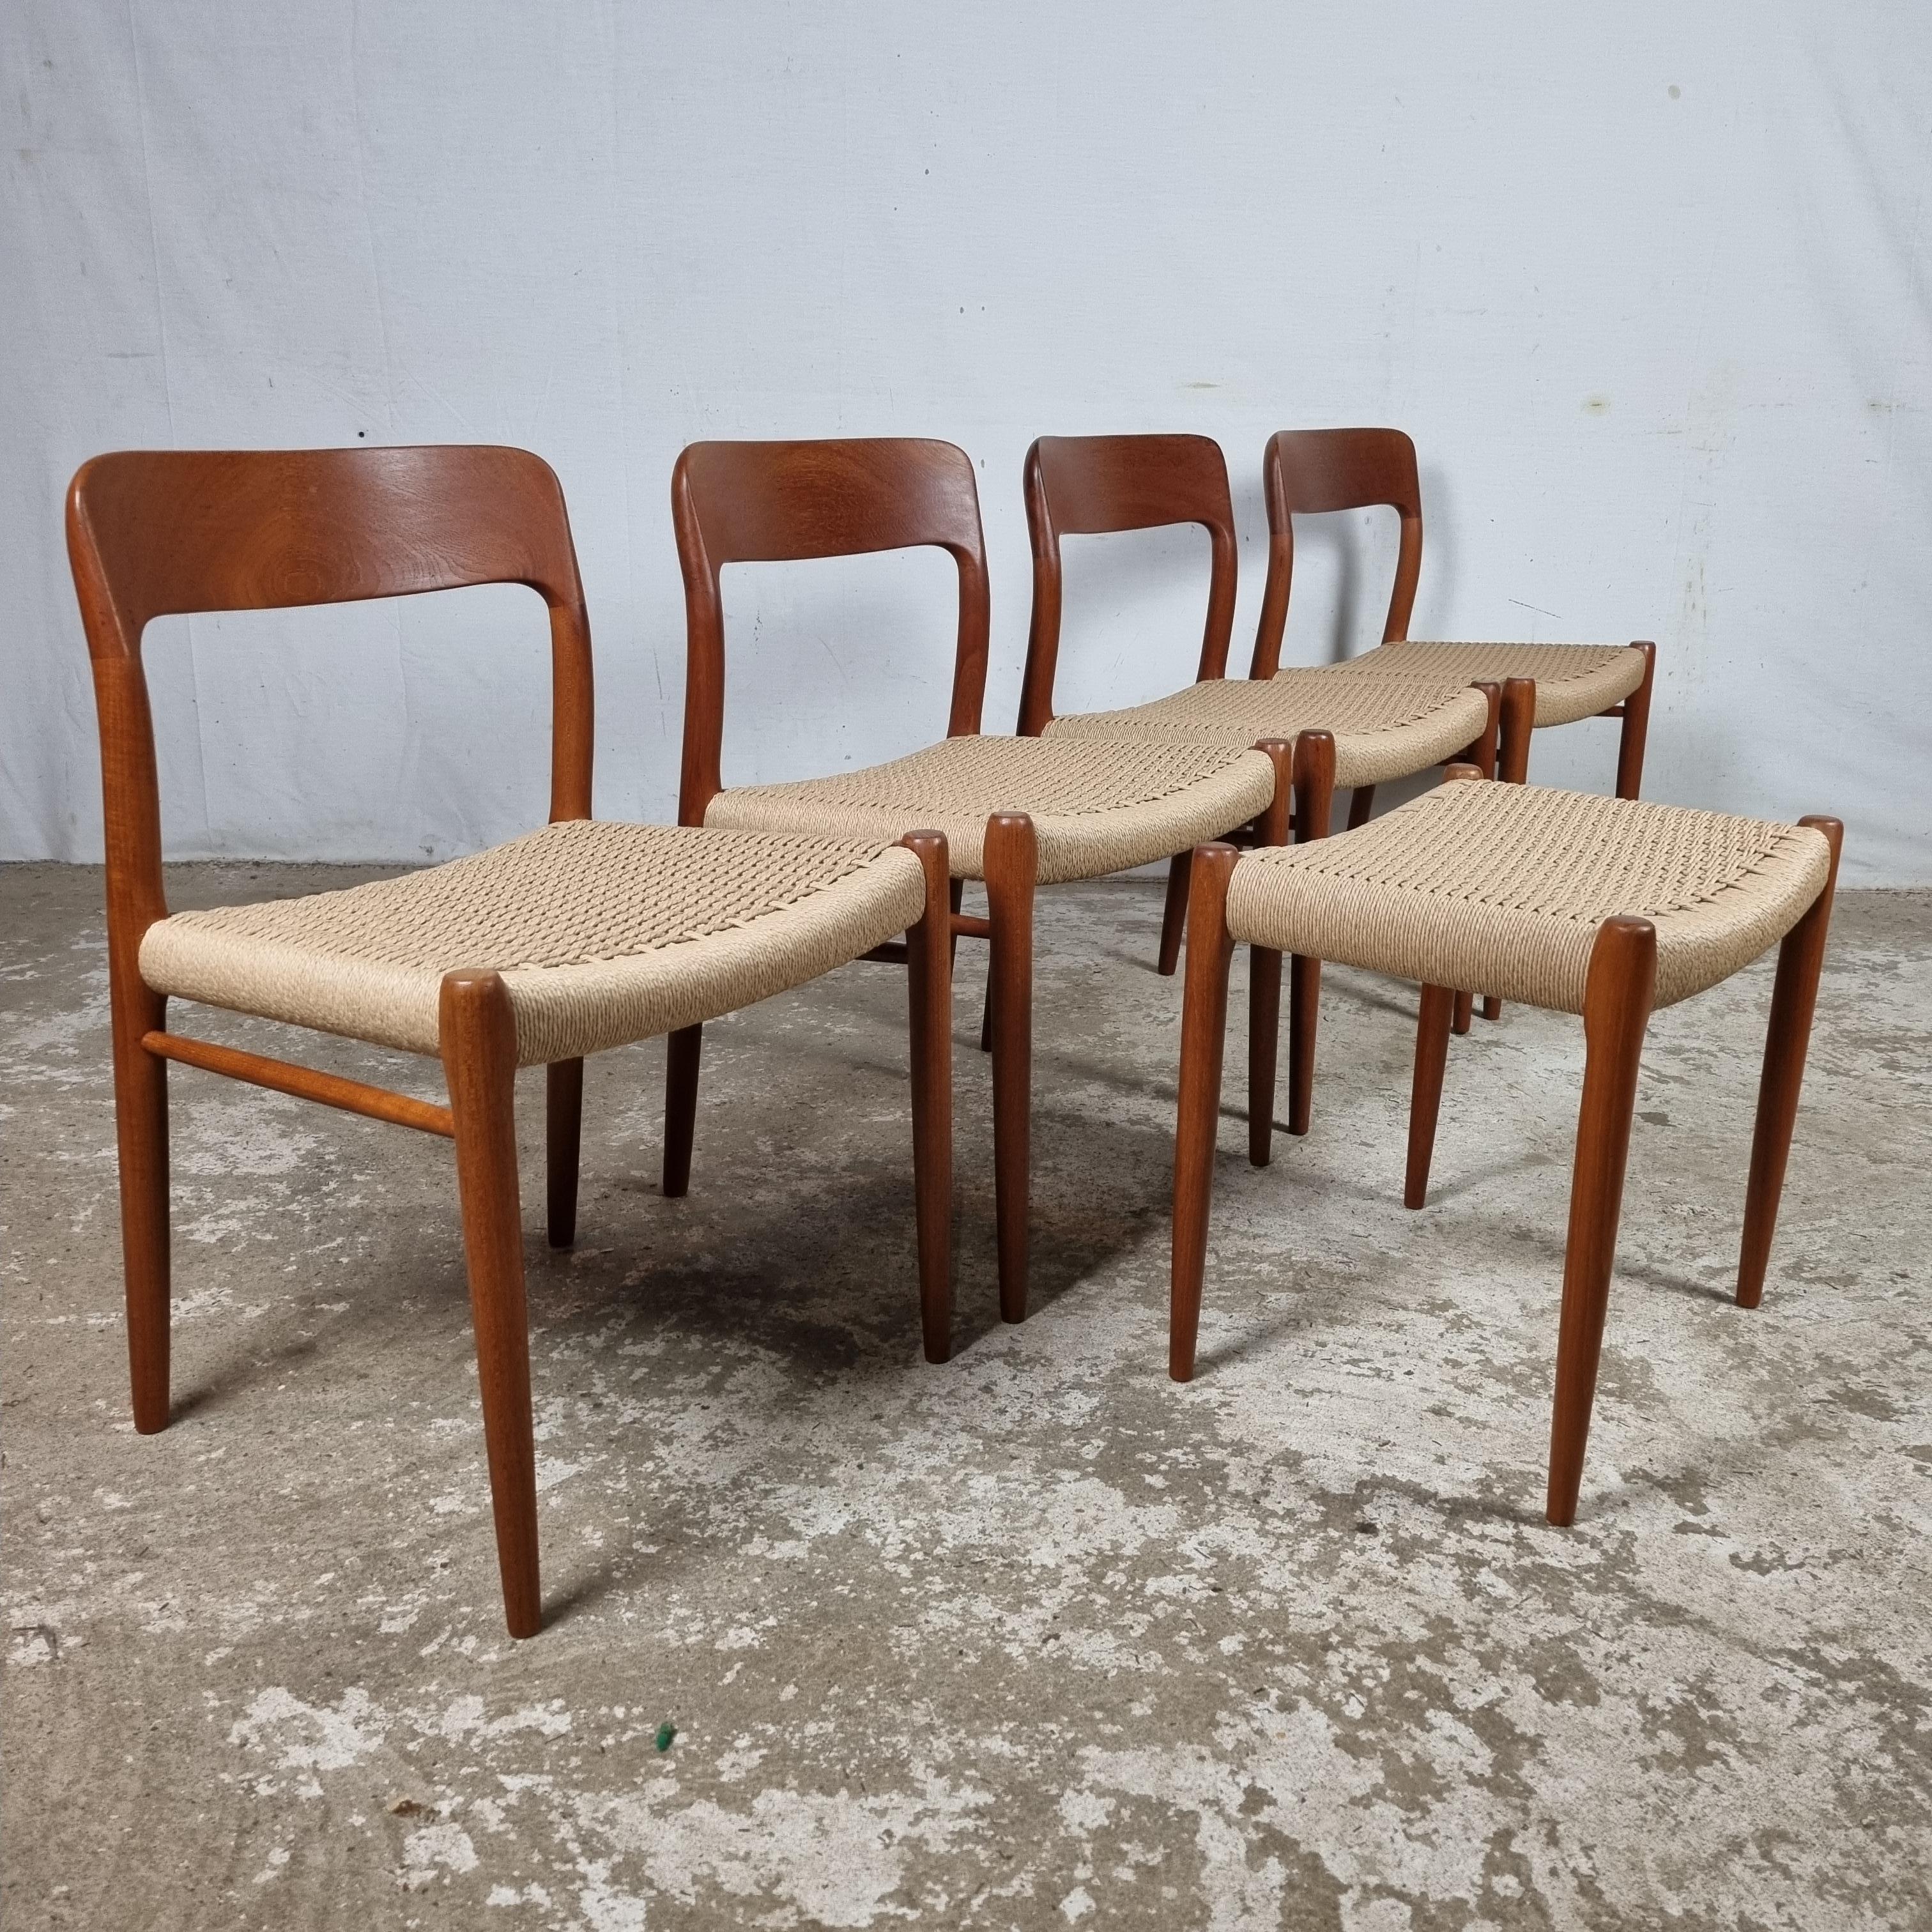 High quality Danish design from the 1960s. A creation by Niels Otto Møller, for his J.L. Møller Factory in Hojbjerg, Denmark🇩🇰.

This particular model no. 75 was designed in 1954. 

The 4 chairs are original old productions from the 1960s, made of